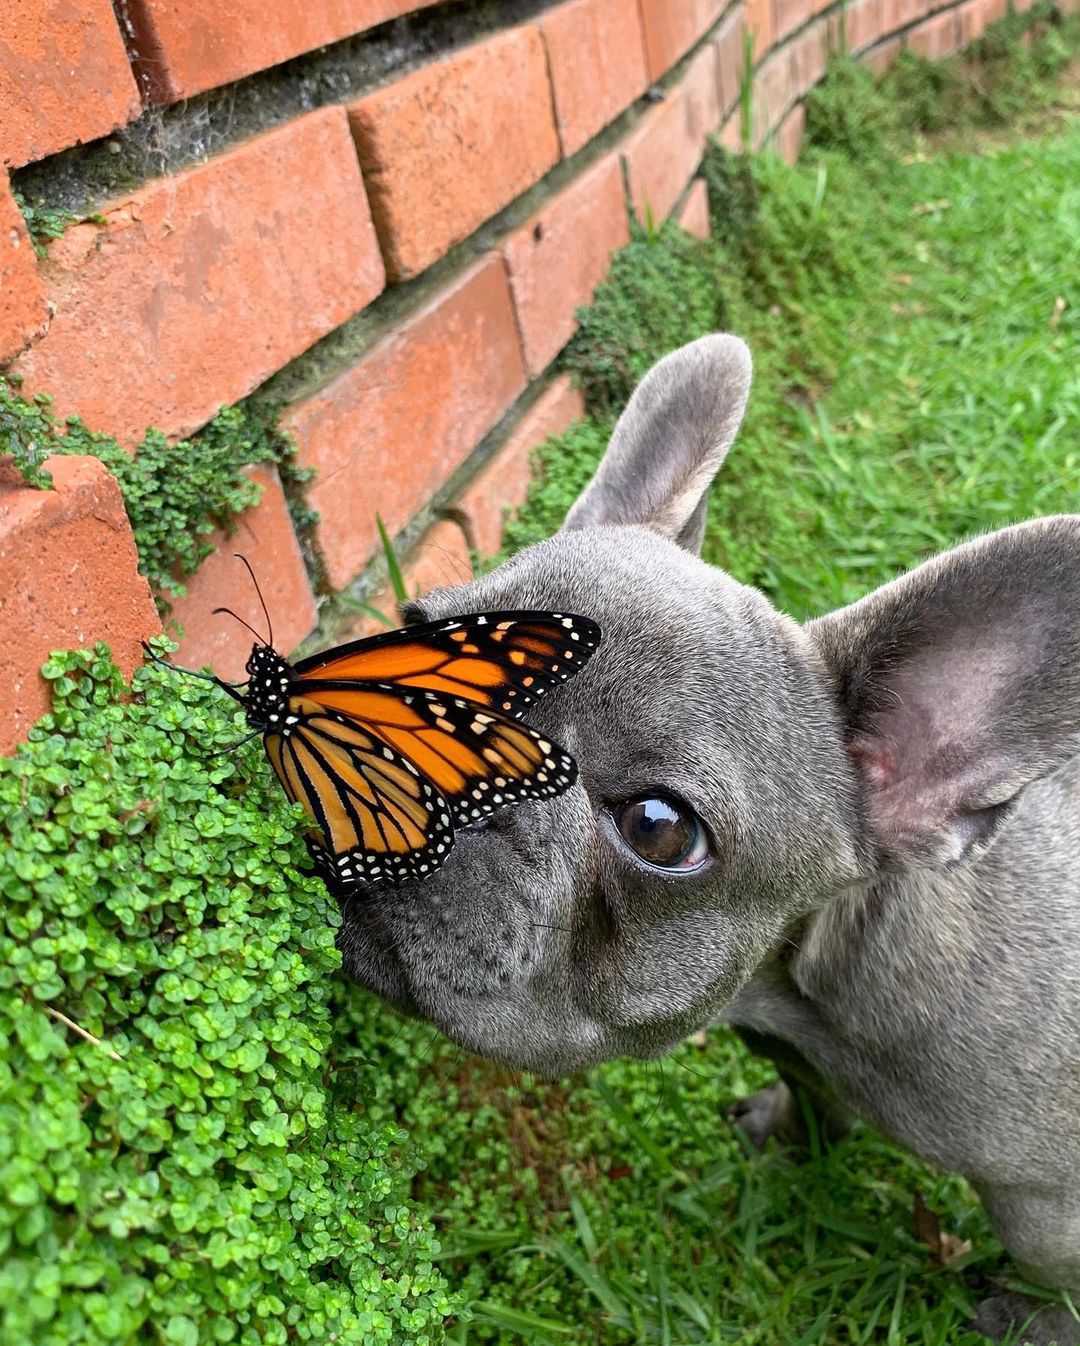 butterfly on a dogs face